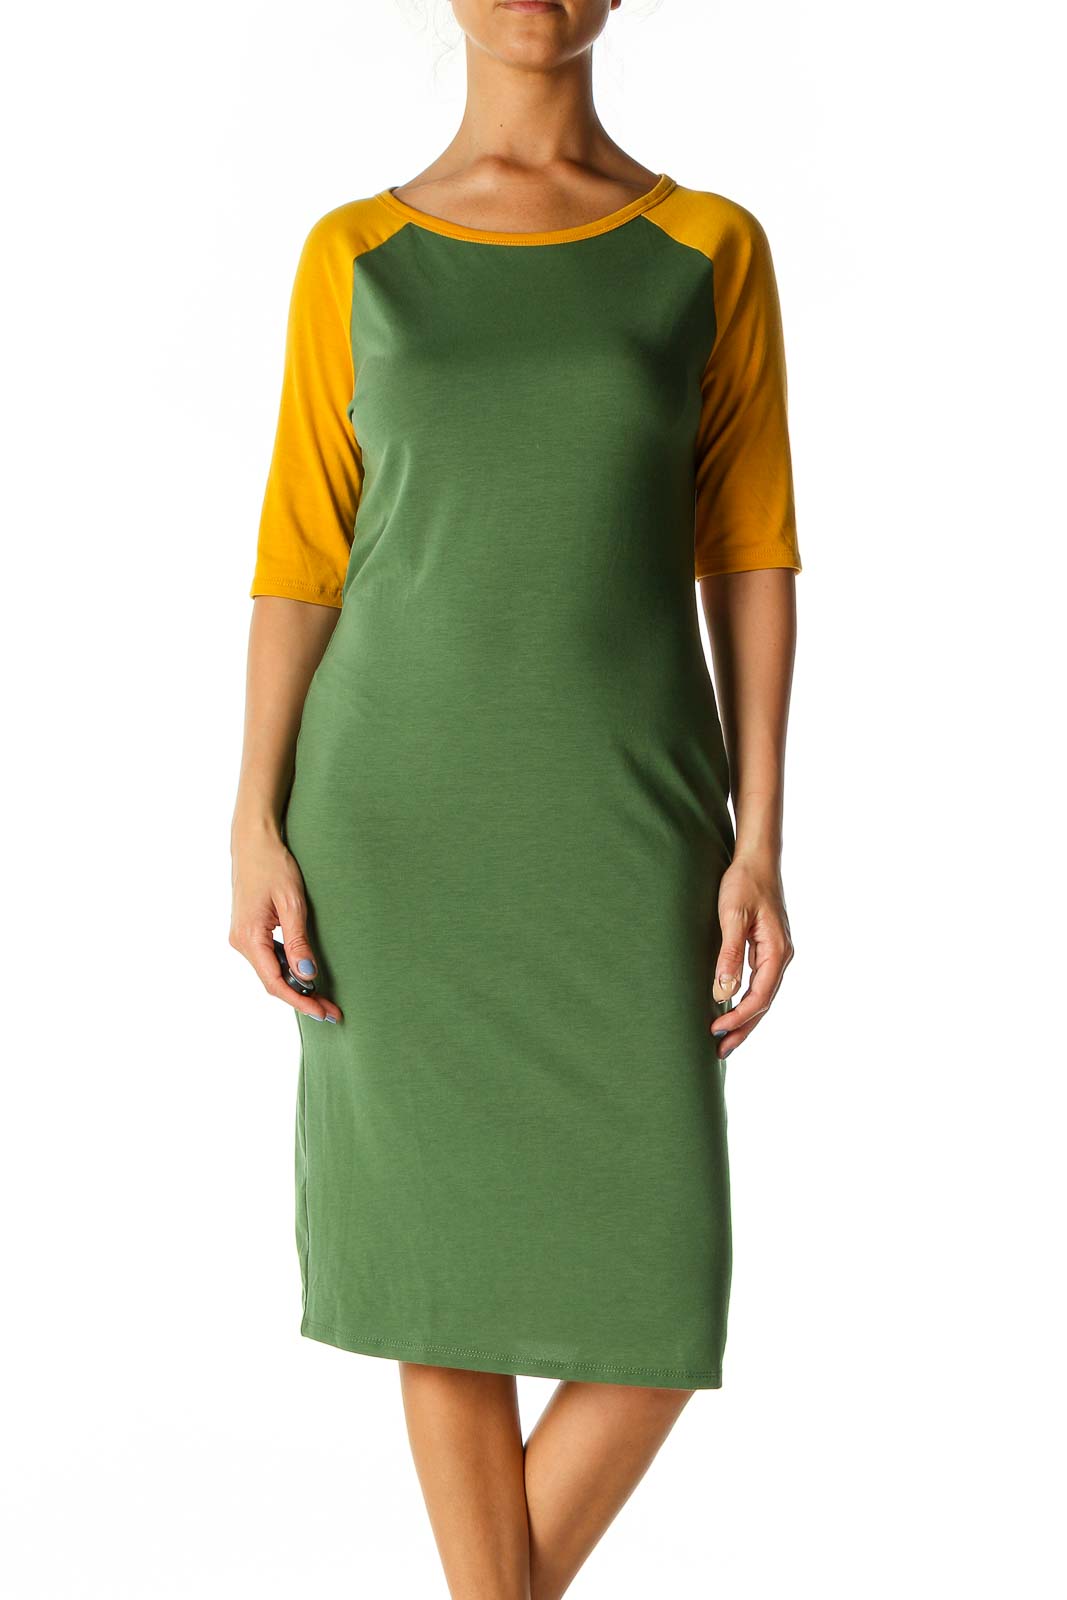 Green Colorblock Casual A-Line Dress Front